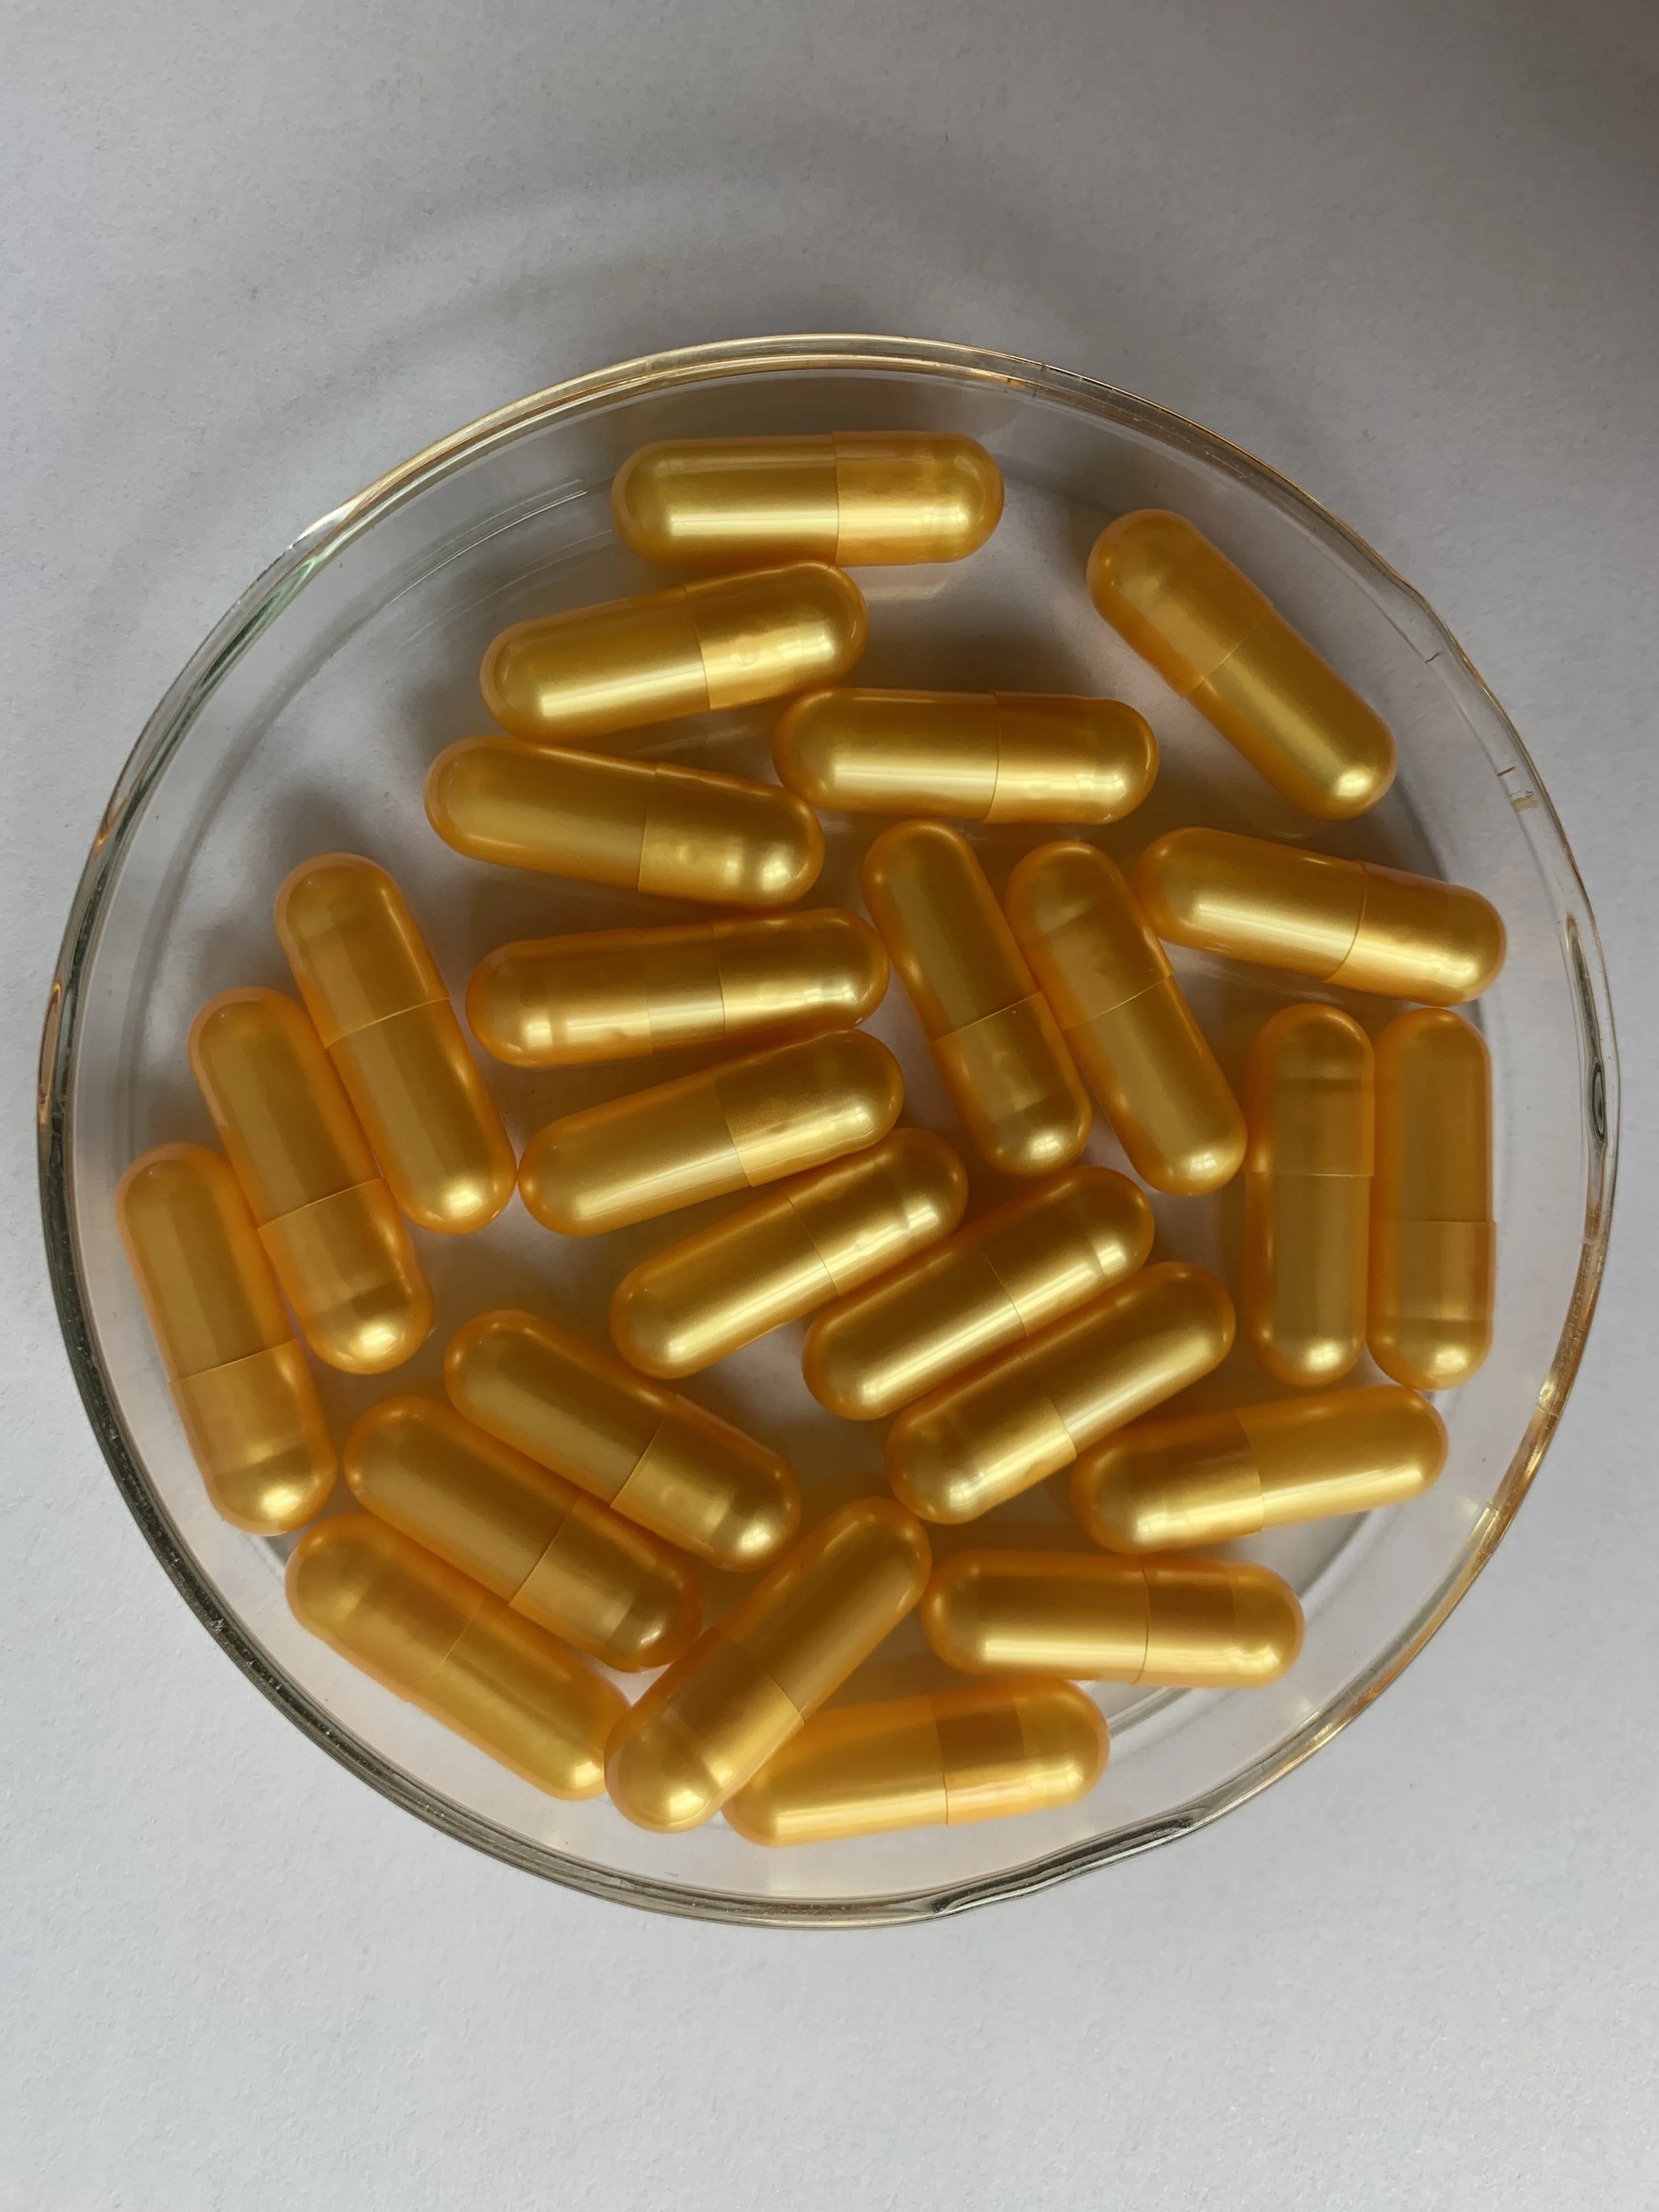 
High Quality Pharmaceutical Pearl Gold Hard Empty Gelatin Capsules Size 00 